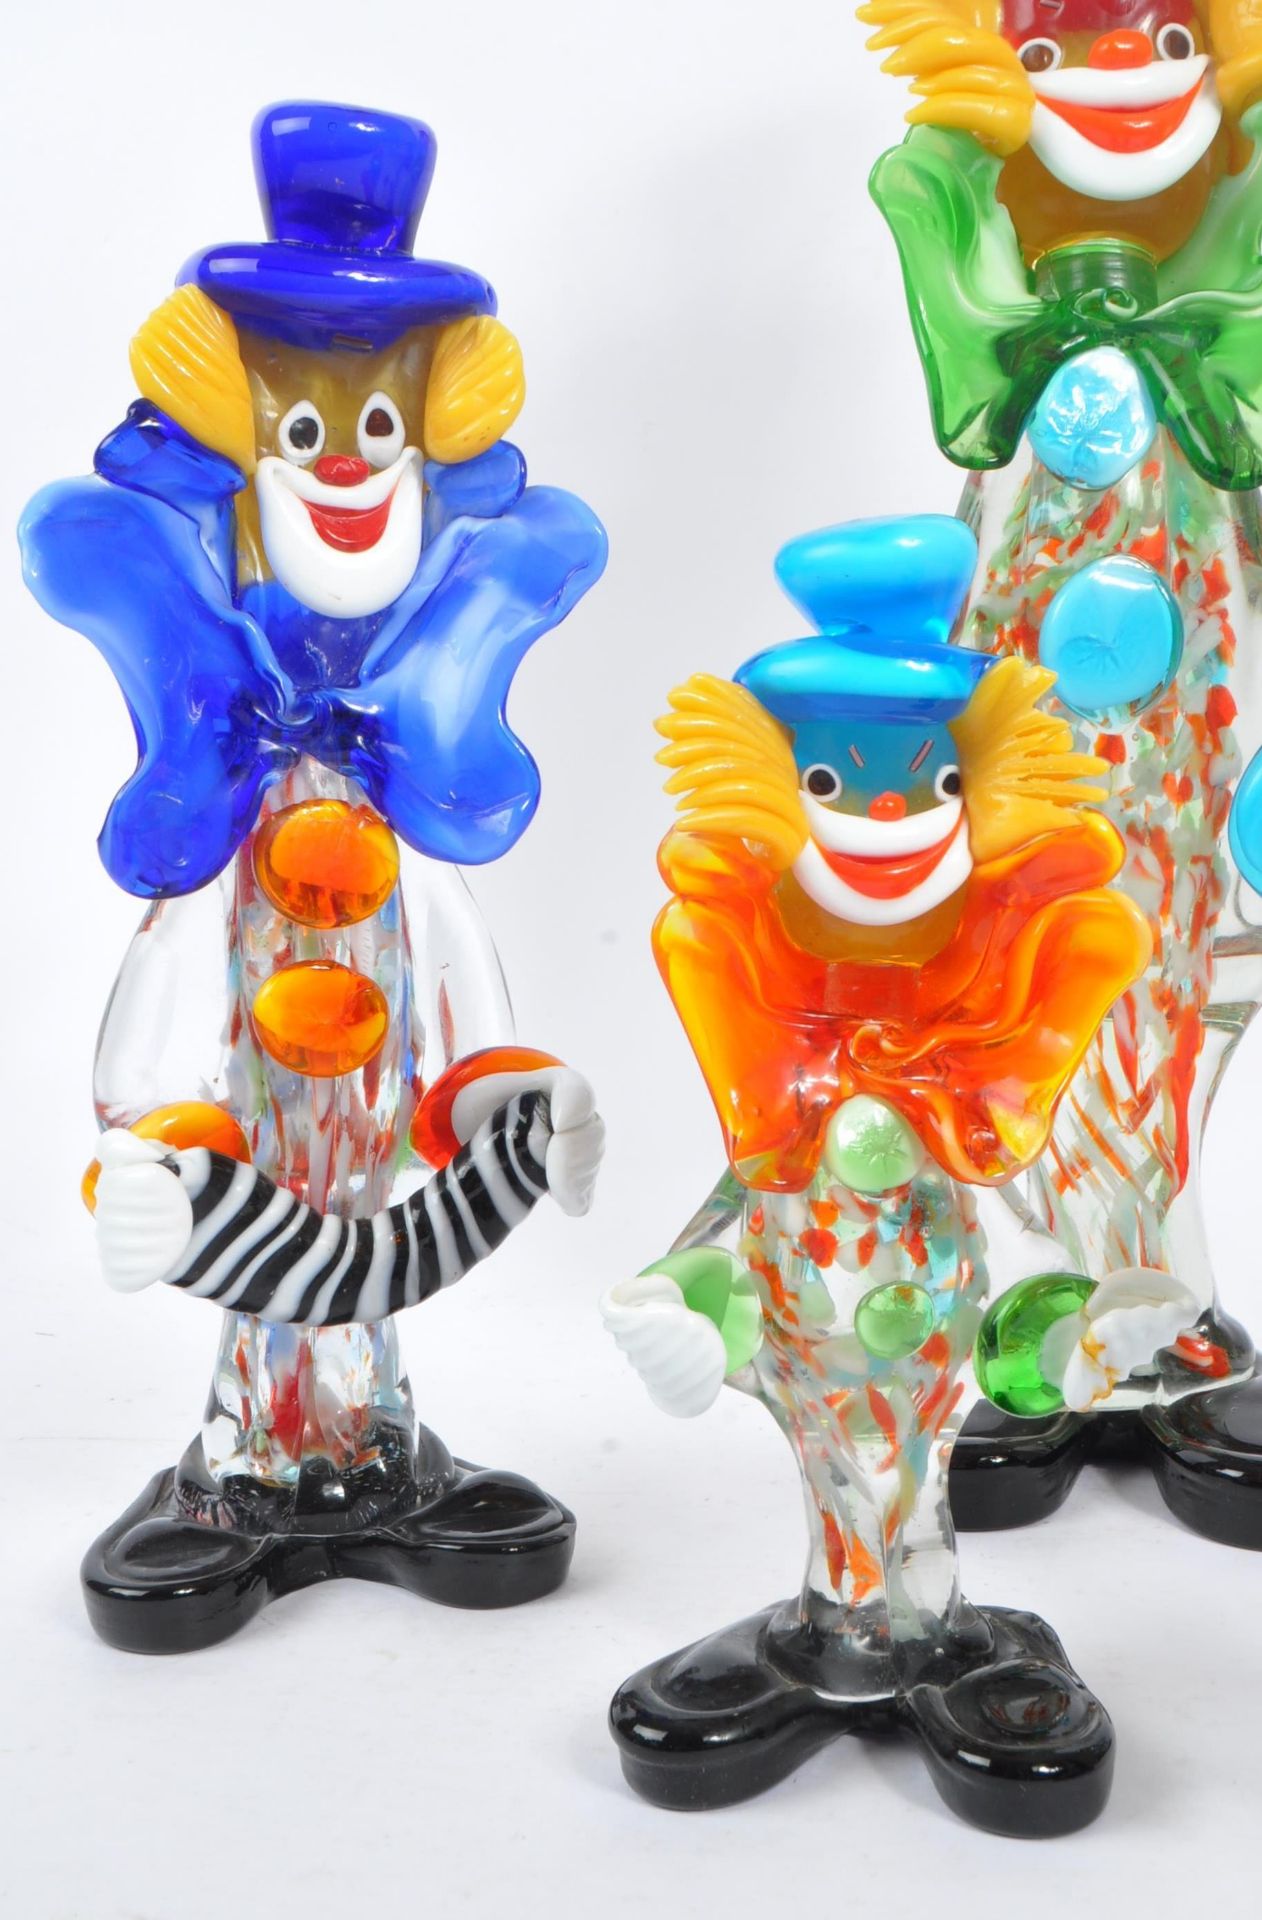 COLLECTION OF FIVE STUDIO GLASS MURANO CLOWNS - Image 2 of 7